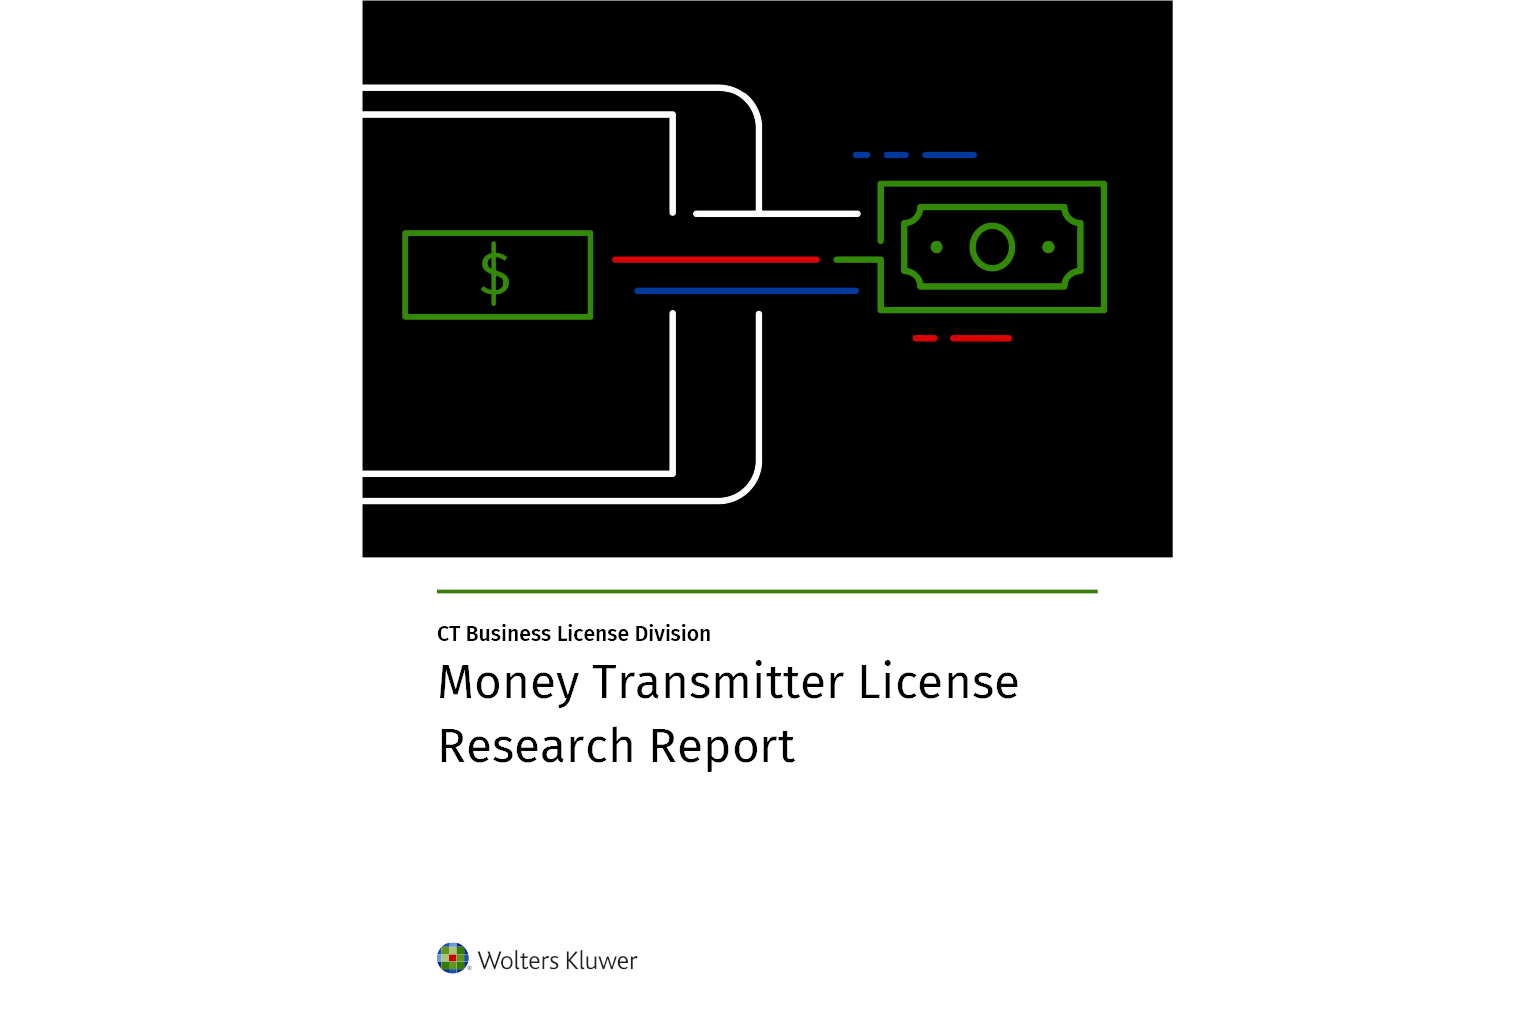 Money Transmitter Business License Research Report from CT Corporation